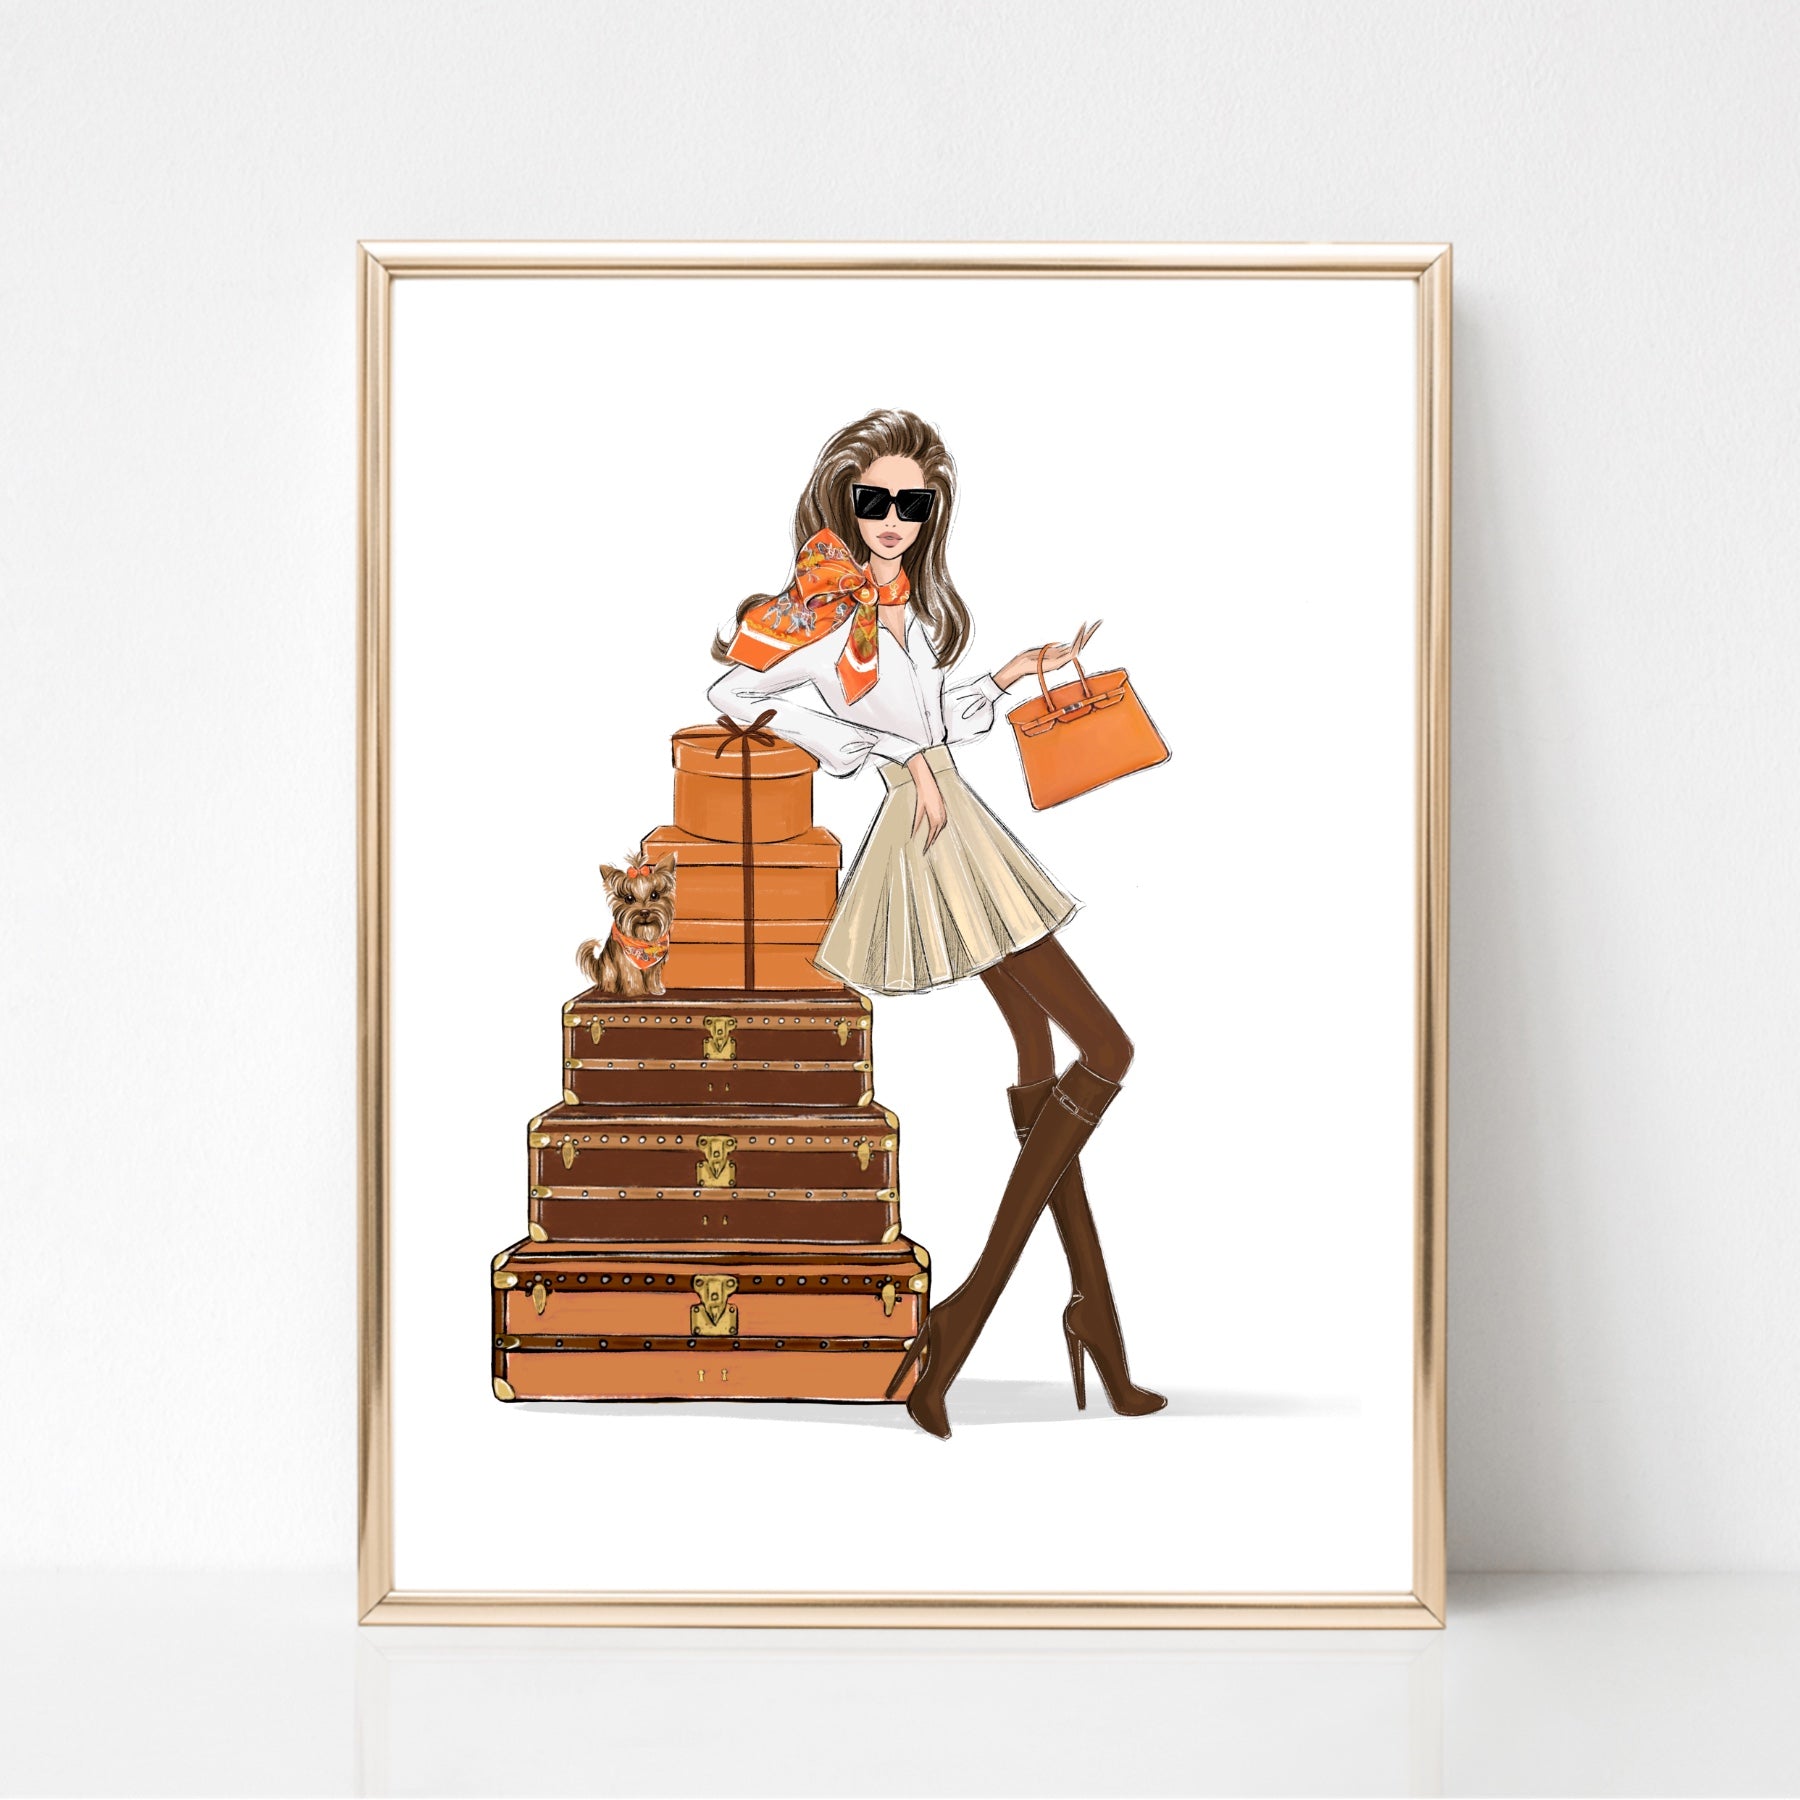 Fashion girl in classy outfit with vintage suitcases and gift boxes art print fashion illustration in orange tones